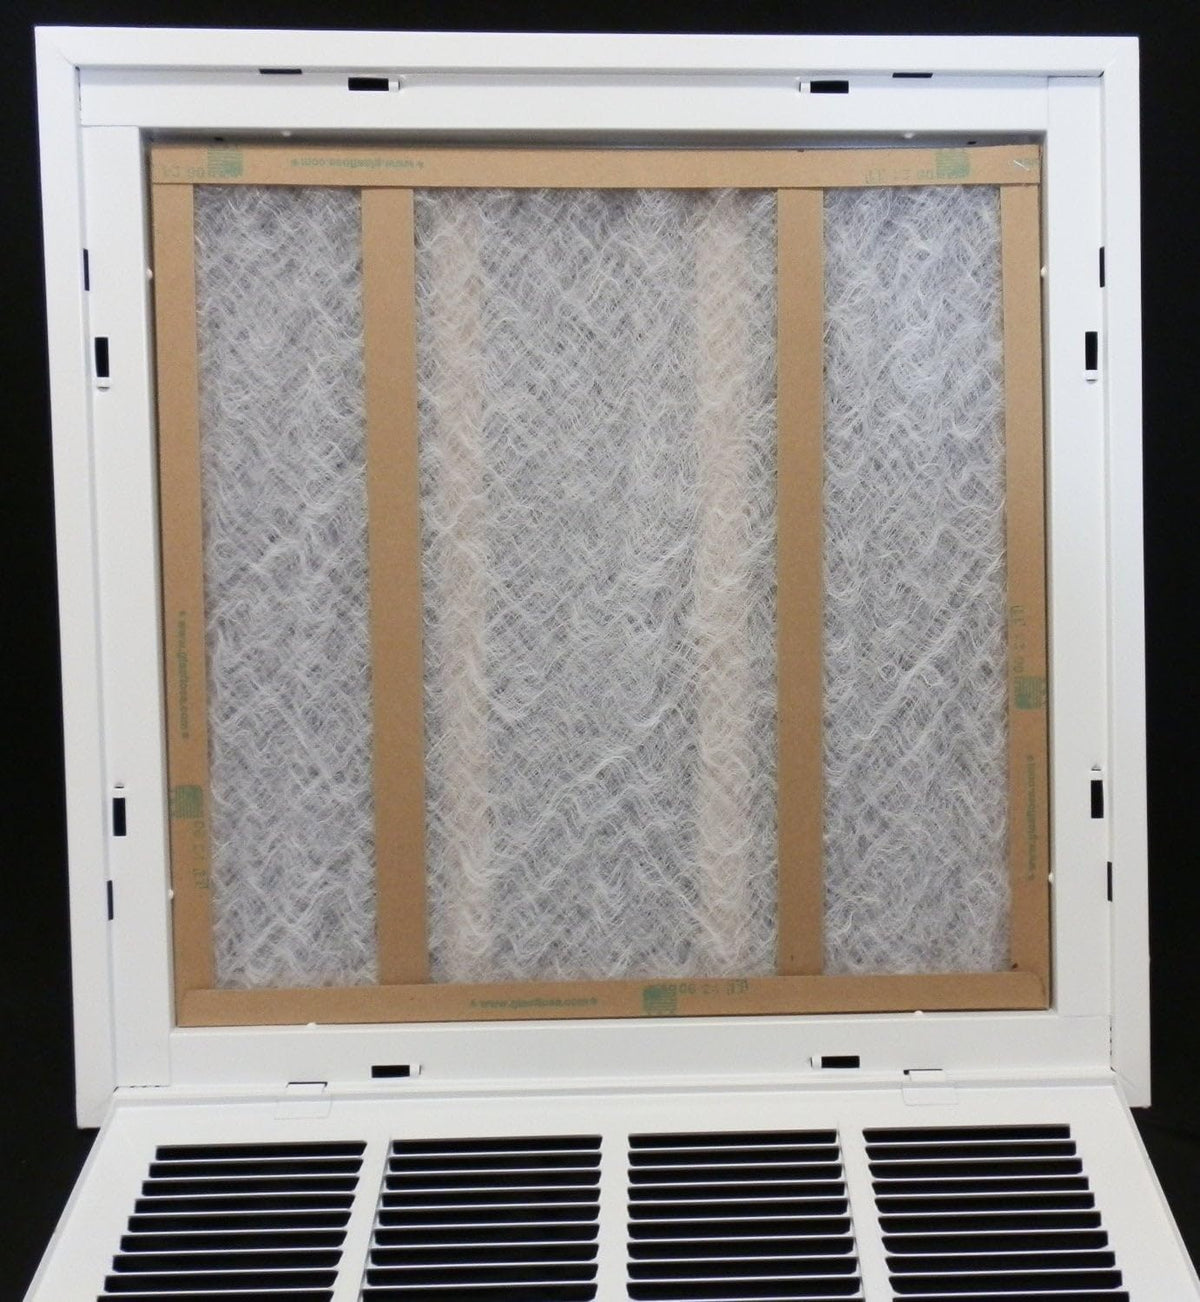 24&quot; X 24&quot; Steel Return Air Filter Grille for 1&quot; Filter - Removable Frame - [Outer Dimensions: 26 5/8&quot; X 26 5/8&quot;]